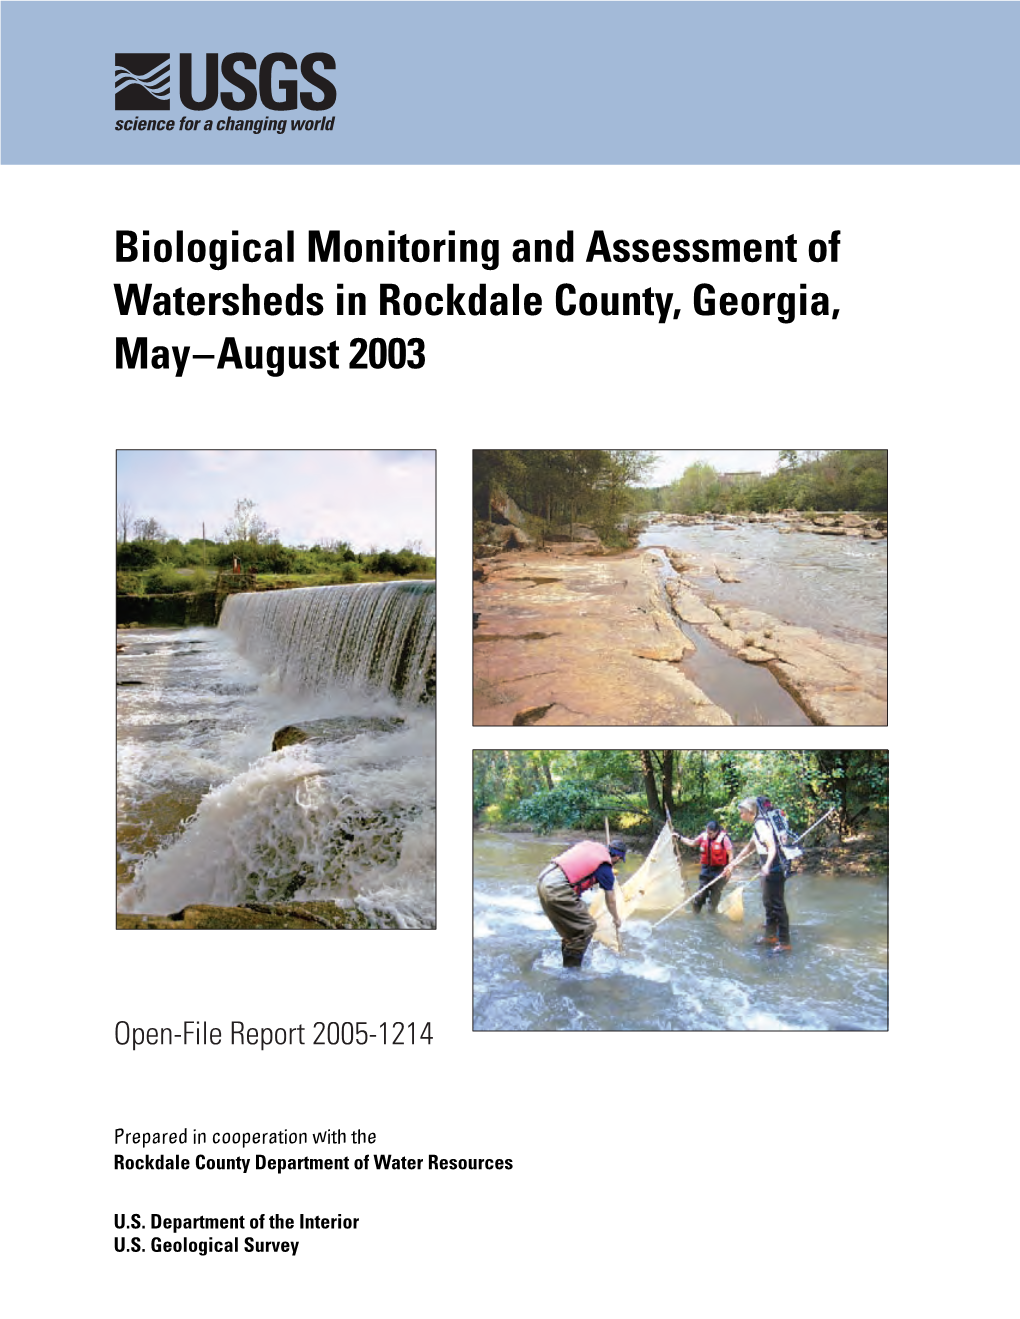 Biological Monitoring and Assessment of Watersheds in Rockdale County, Georgia, May–August 2003